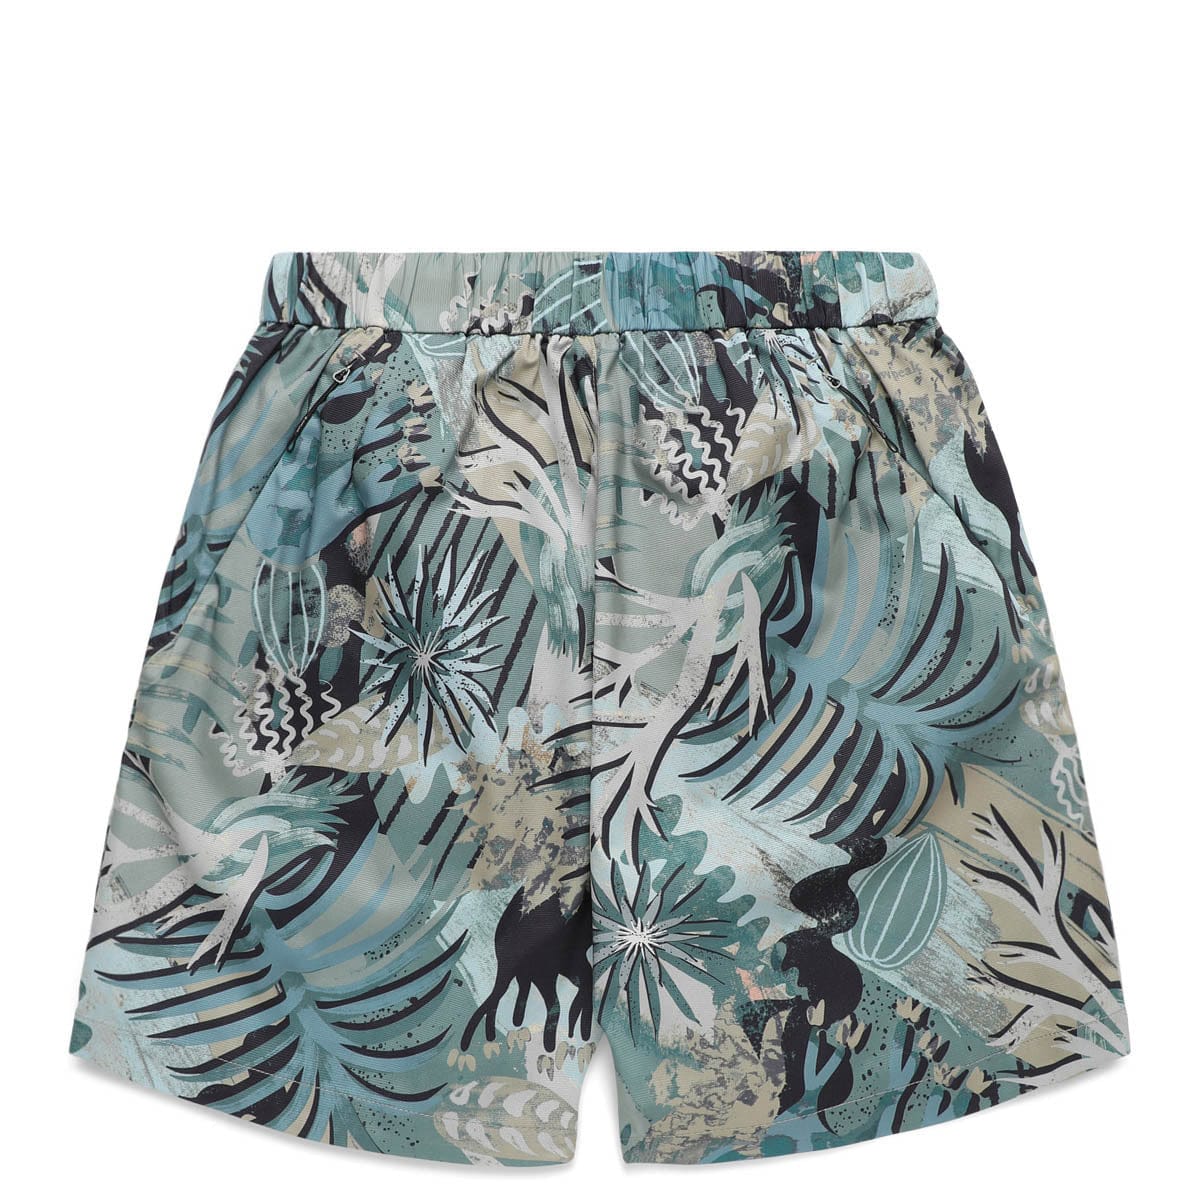 PRINTED BREATHABLE QUICK DRY SHORTS